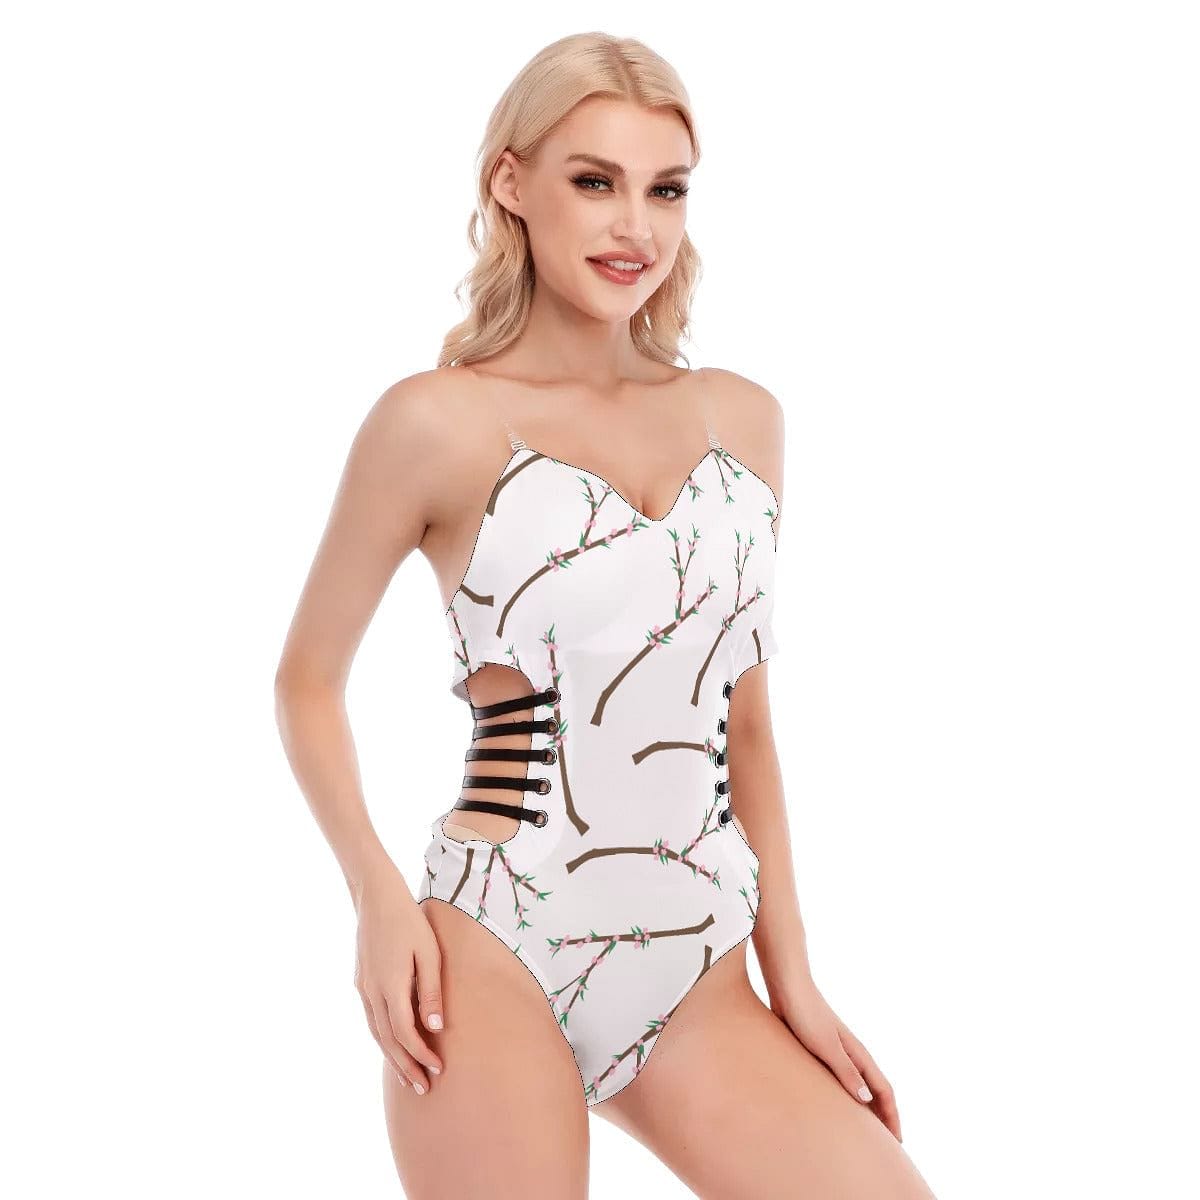 All-Over Print Women's Tube Top Bodysuit With Side Black Straps